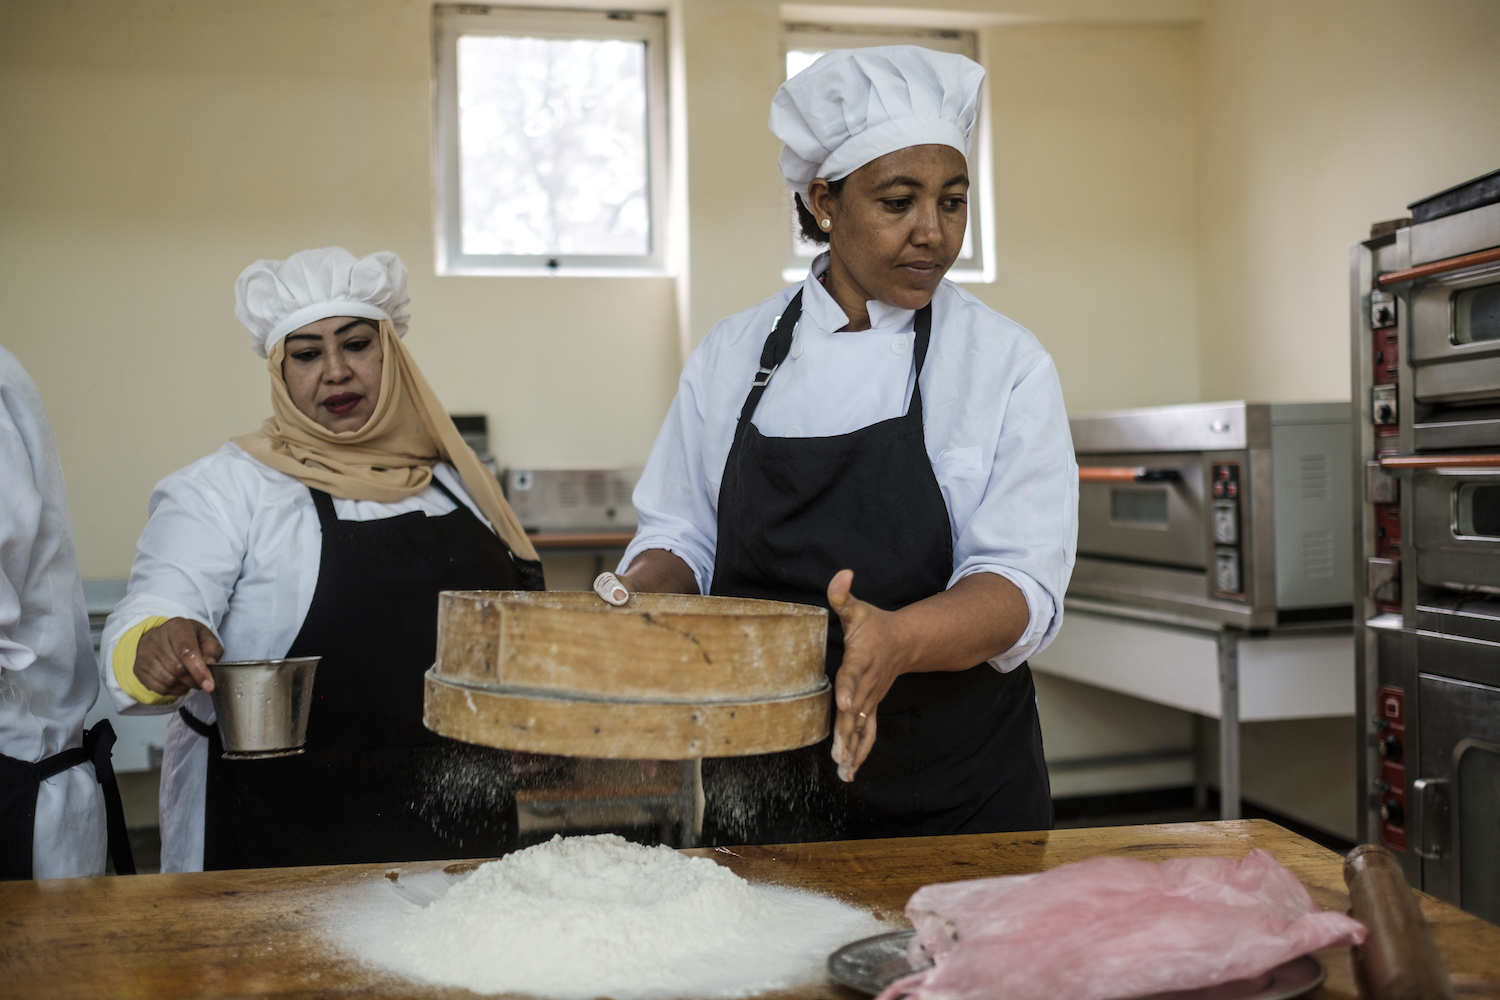 Refugee workers baking in a kitchen